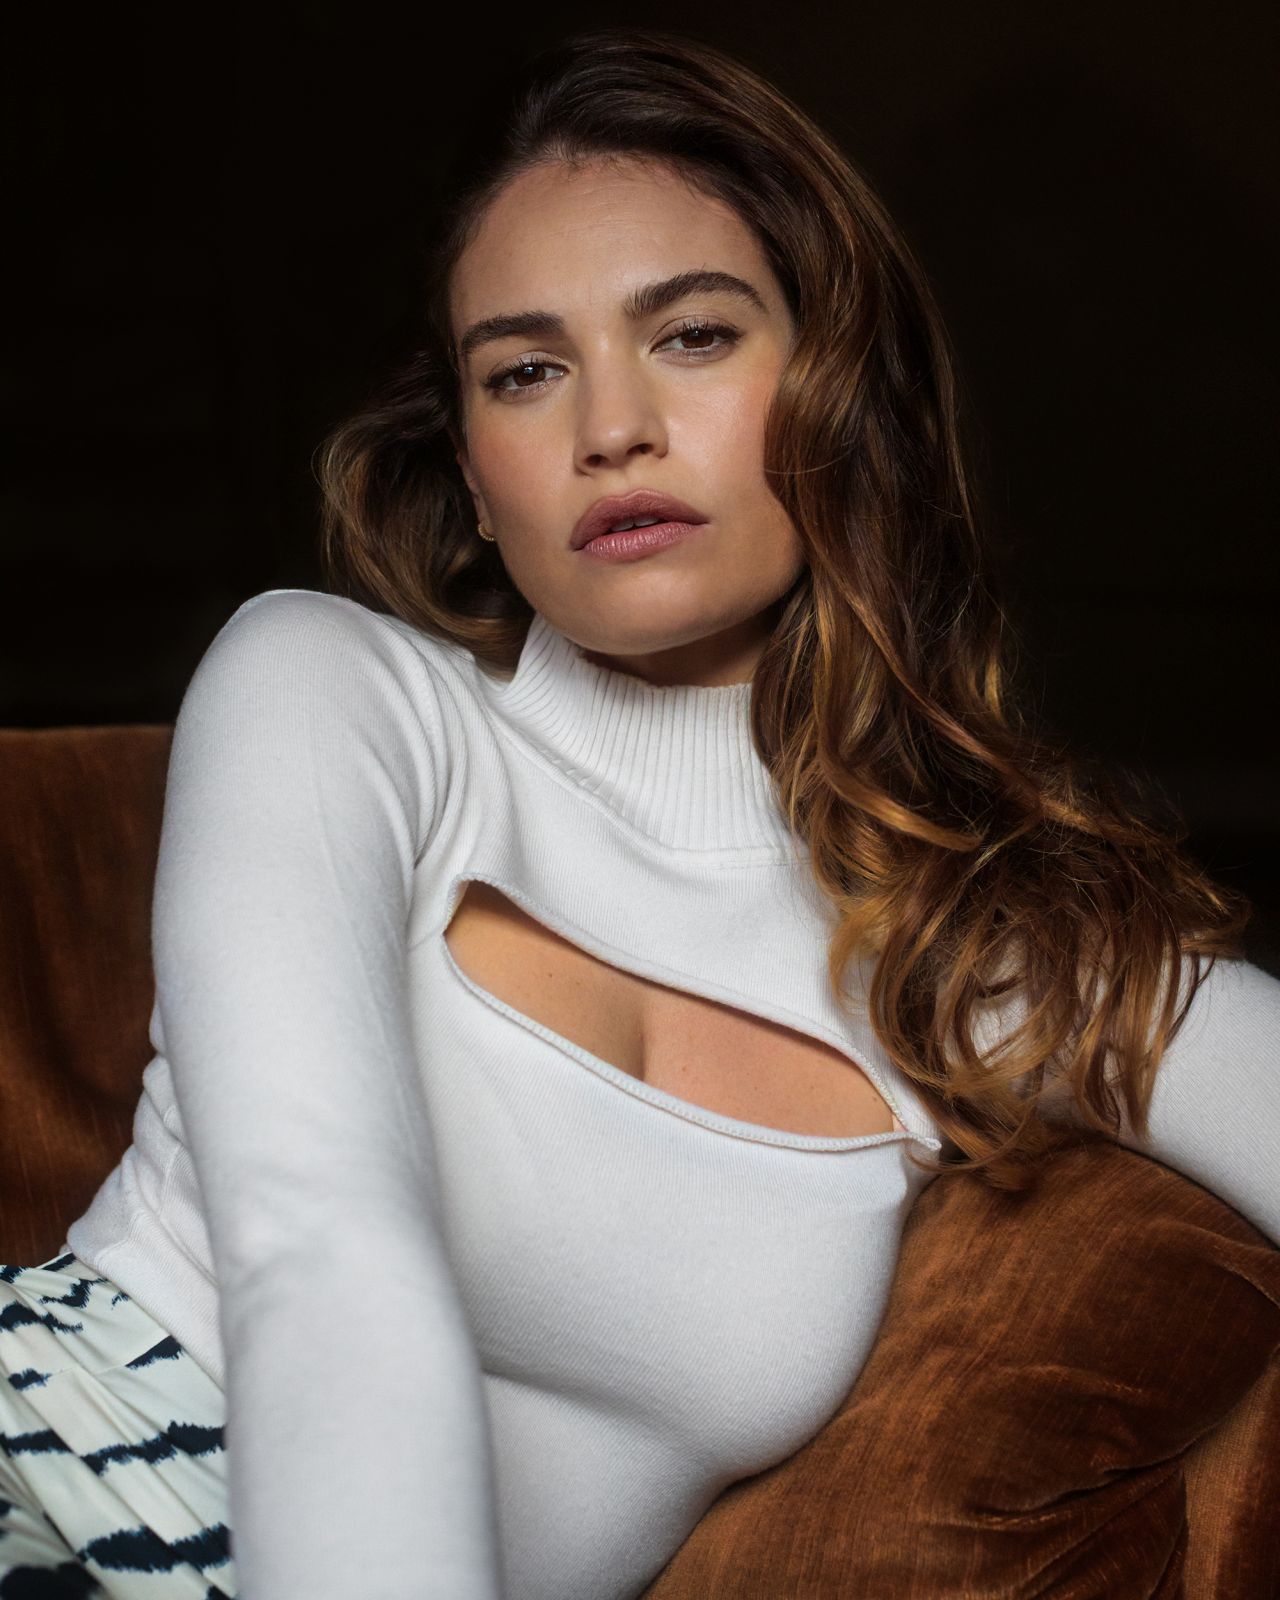 lily-james-rolling-stone-february-2022-3.jpg